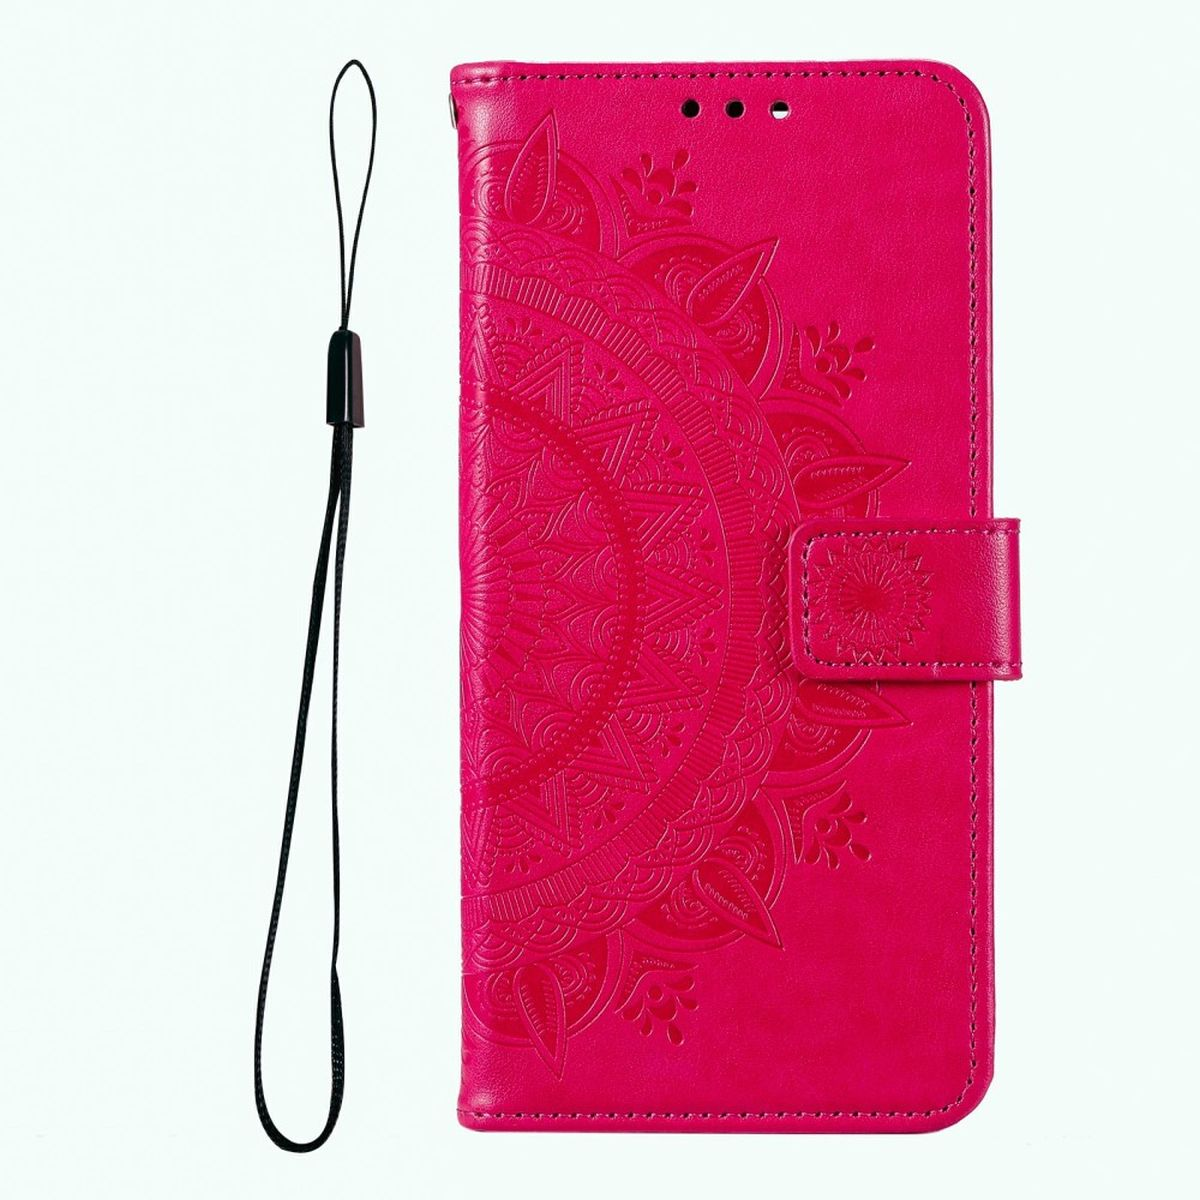 COVERKINGZ Klapphülle mit Samsung, Pink Bookcover, Mandala Galaxy Muster, A03